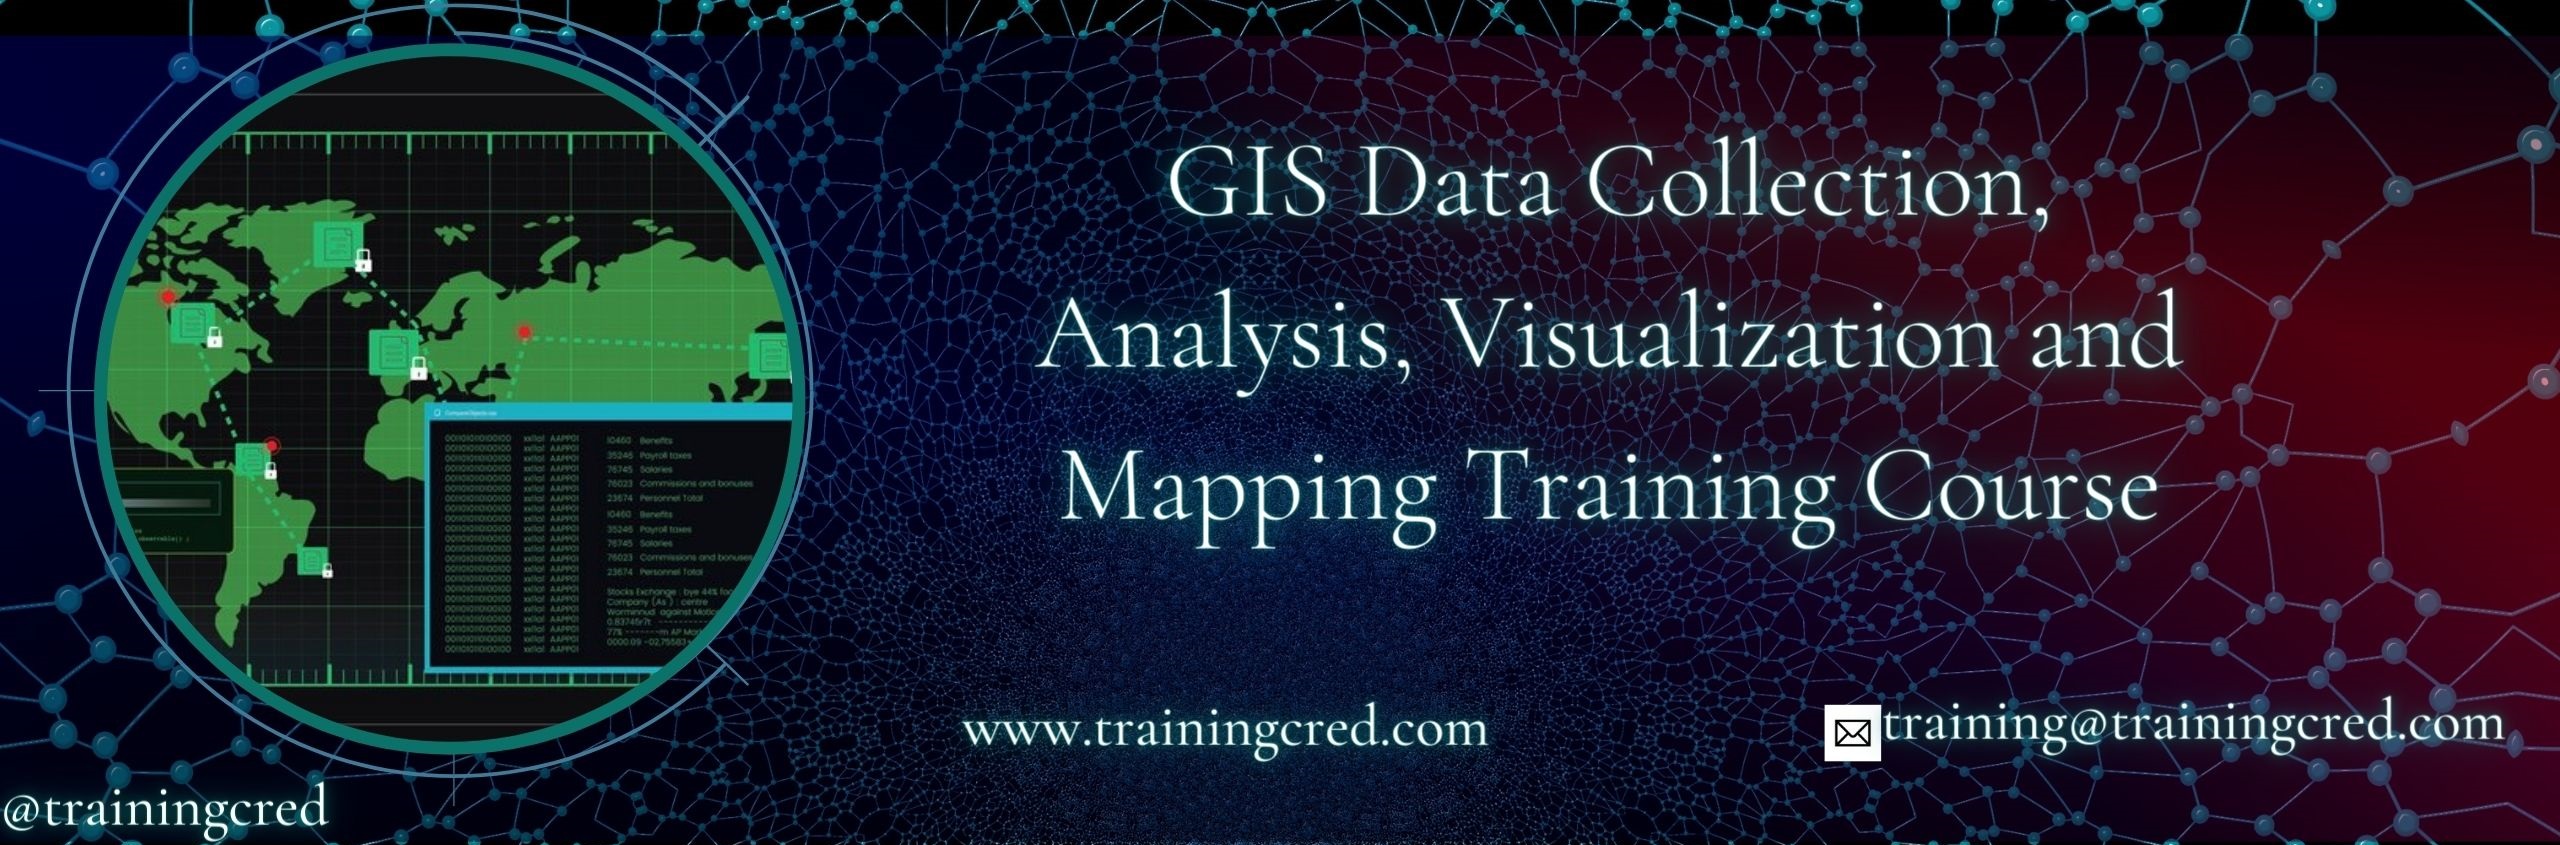 GIS Data Collection, Analysis, Visualization and Mapping Training